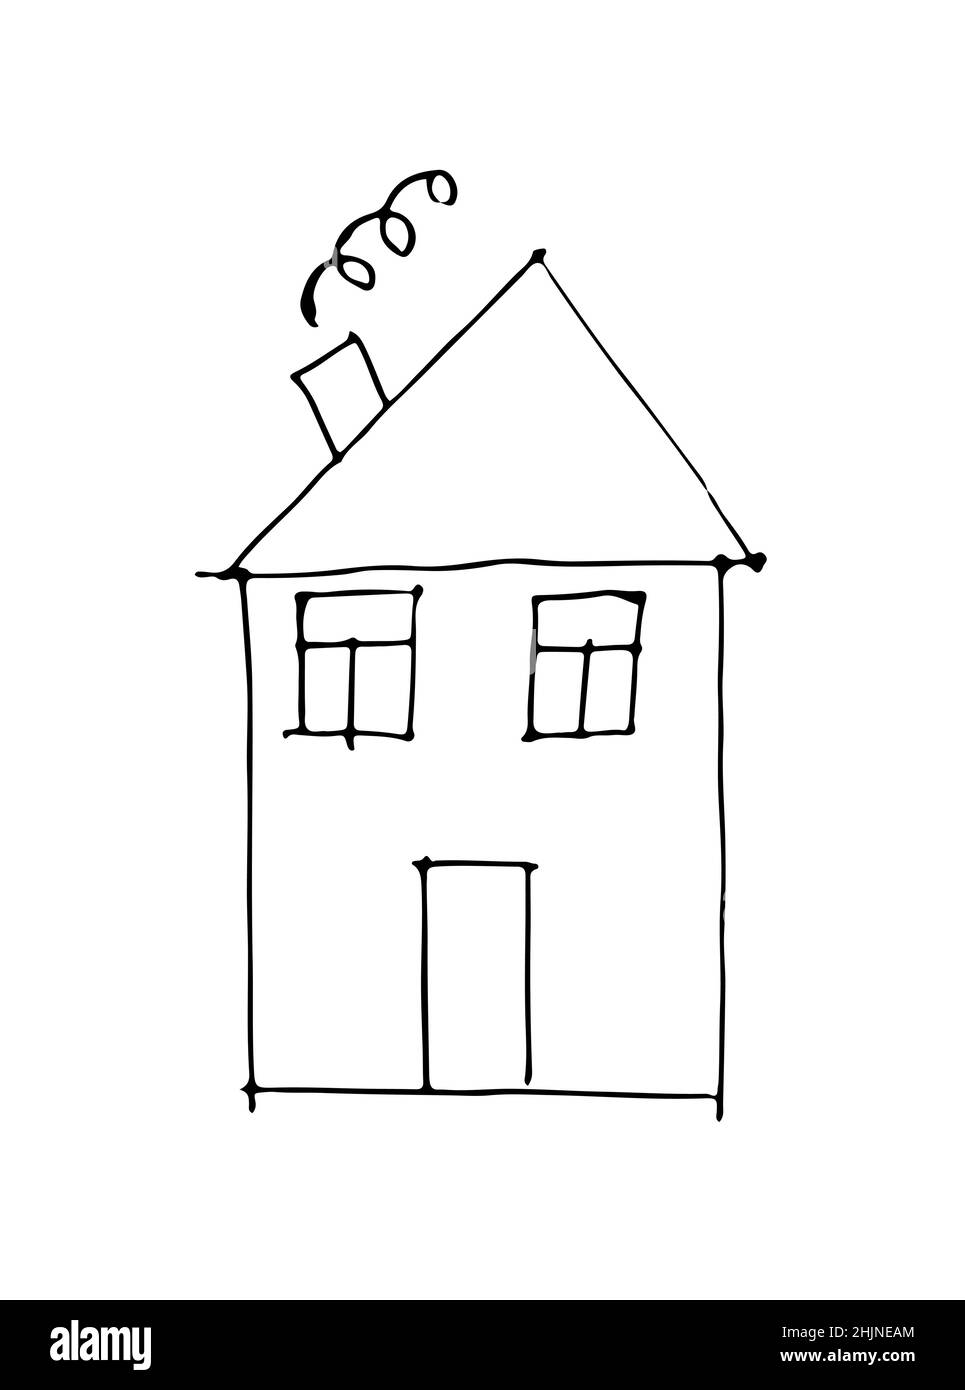 City small houses outline drawing Royalty Free Vector Image